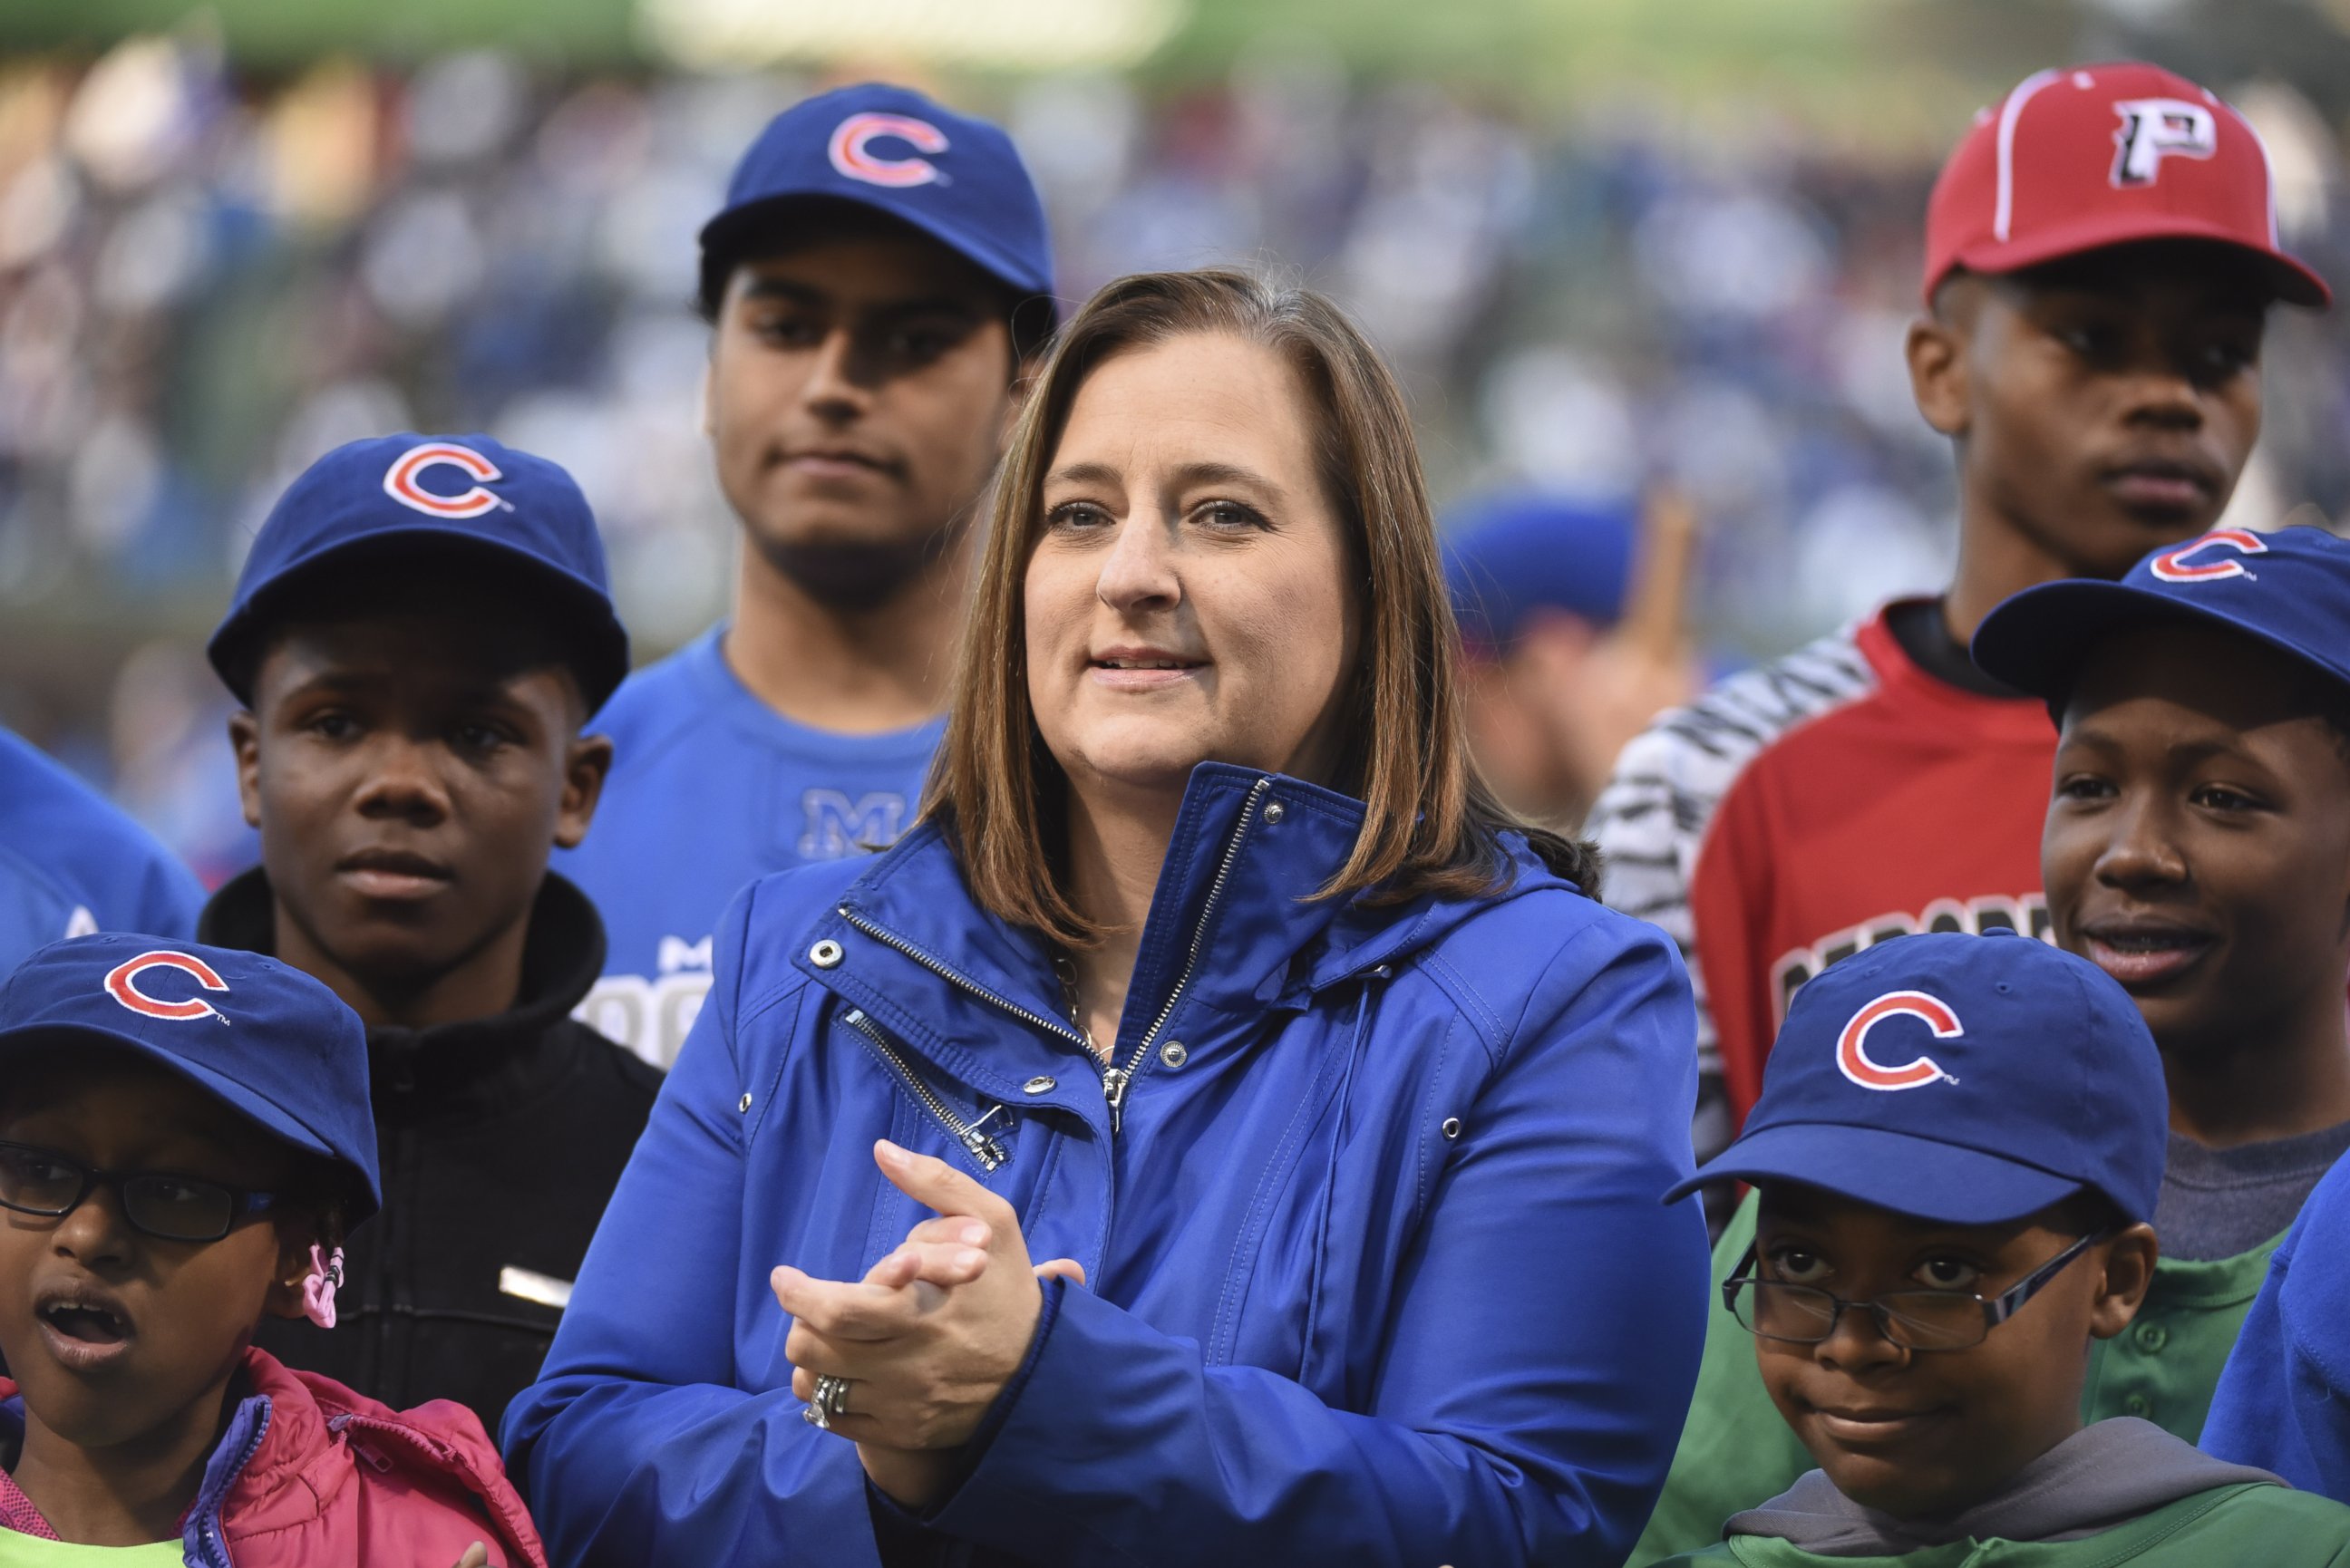 PHOTO: Laura M. Ricketts (C) co-owner of the Chicago Cubs  before the game between the Chicago Cubs and the Cincinnati Reds, April 14, 2016, at Wrigley Field in Chicago.